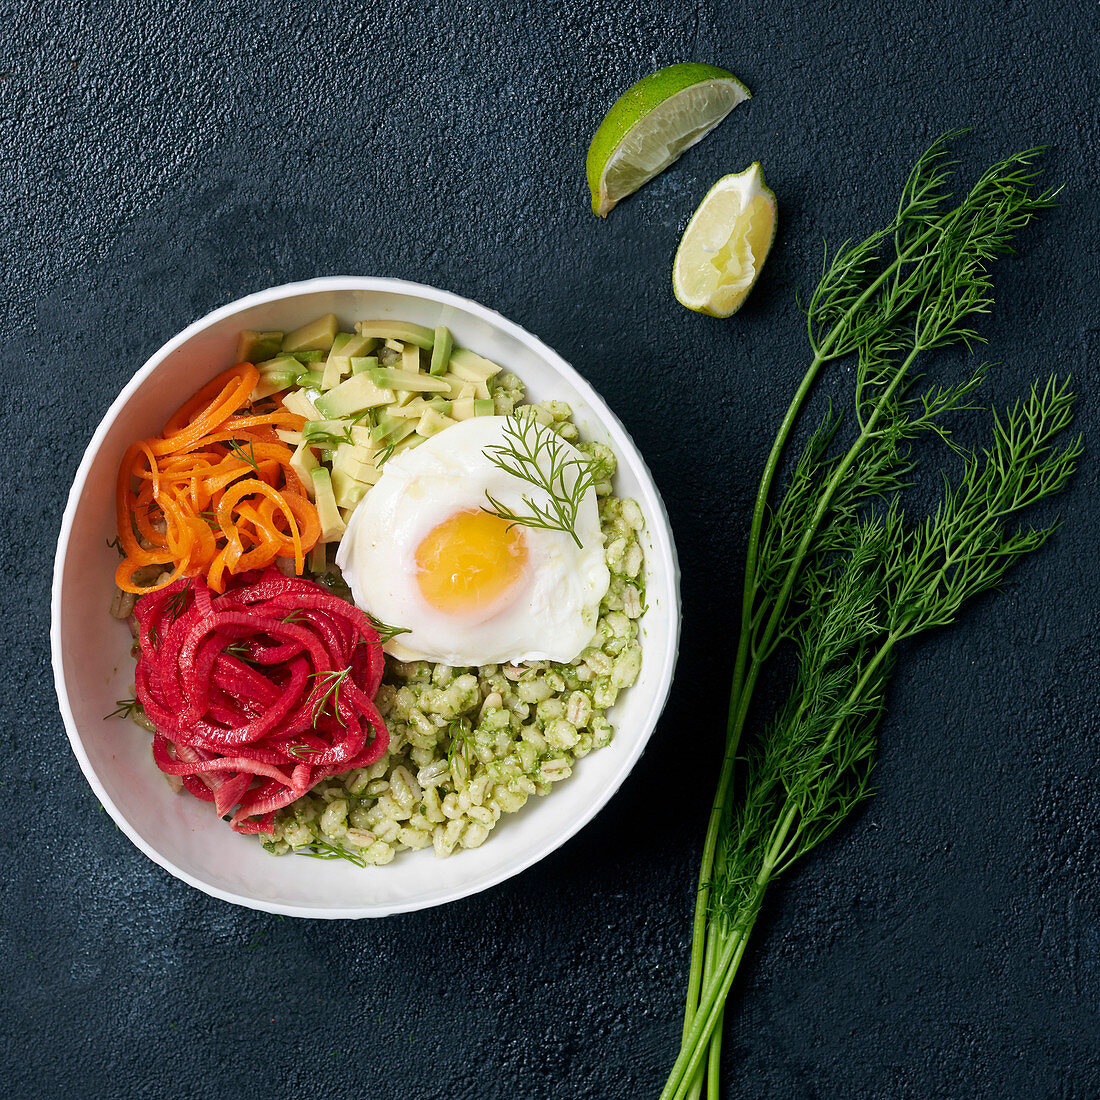 Bowl with wheat, vegetable noodles, avocado, egg and dill sauce